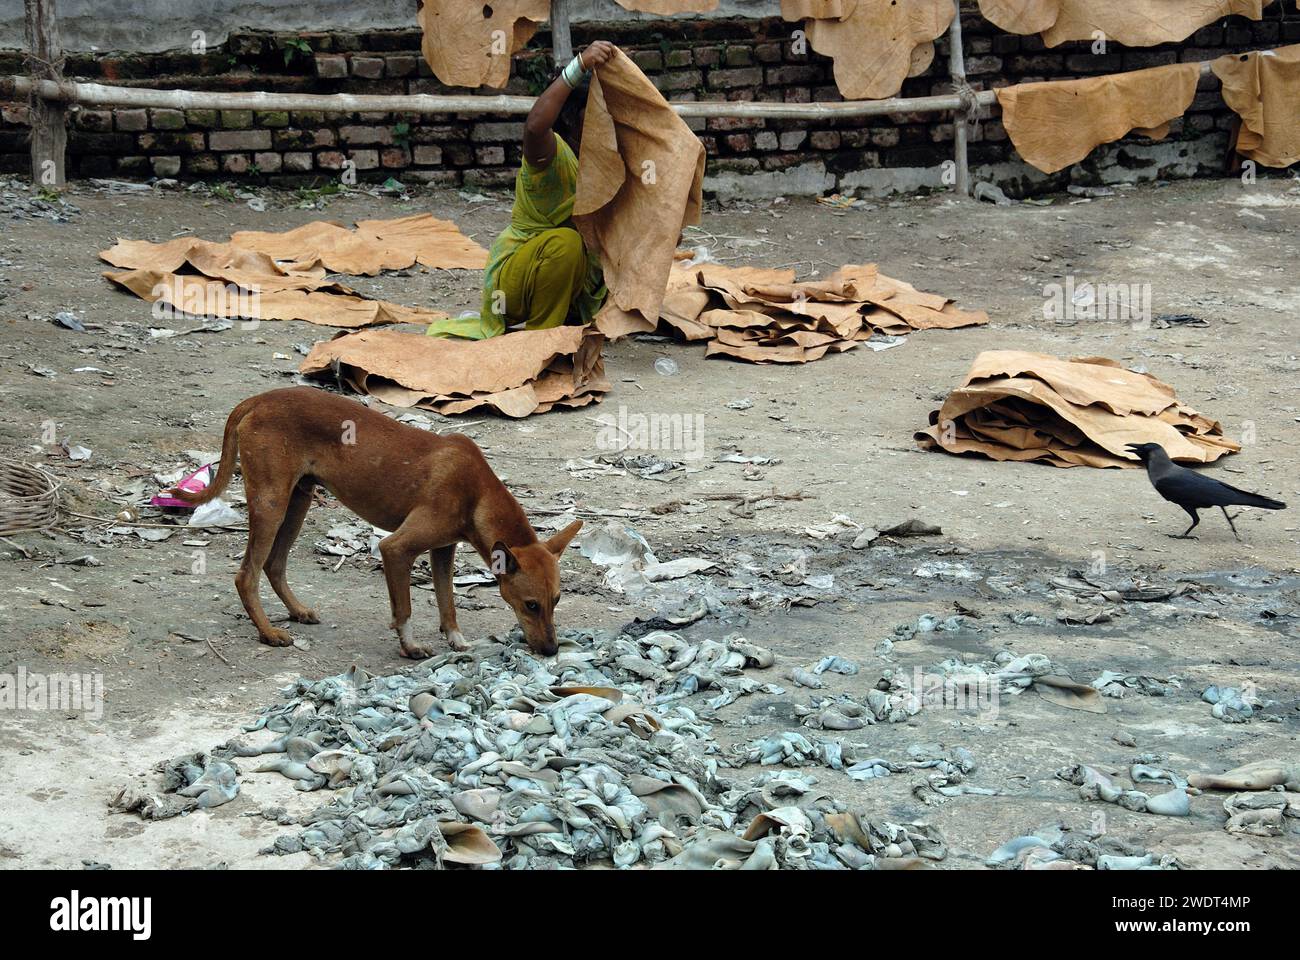 Dogs die due to bad environment. This is the grim reality of stray dogs living near Park Circus in central Kolkata- who are dying everyday because of industrial pollution from leather factories. According to a report by the National Environmental Engineering Research Institute, presence of chrome-based tanning among Kolkata tanners, with inappropriate wastewater drainage and collection systems, was causing serious environmental, health and hygiene problems. Several units are still functioning illegally in the Tangra & char number-park circus area. Kolkata, West Bengal, India. Stock Photo